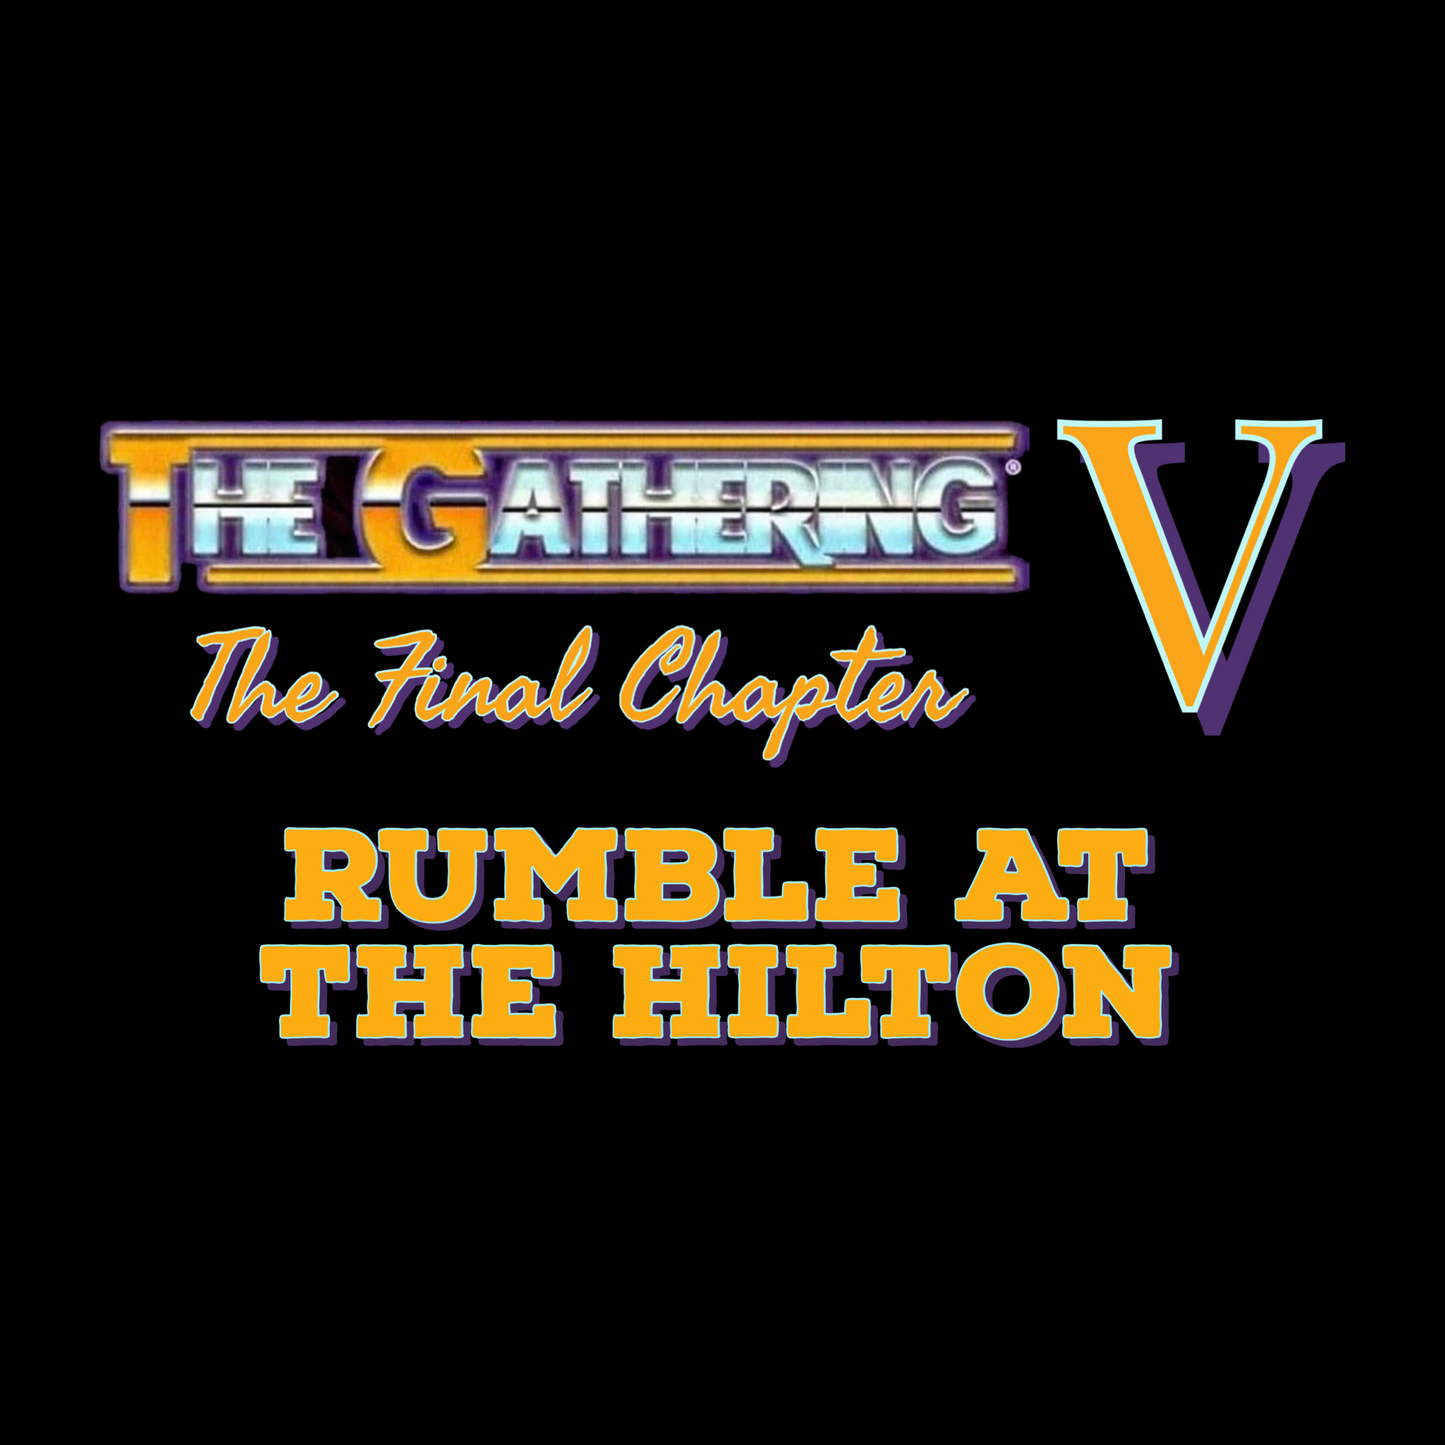 Rumble at the Hilton